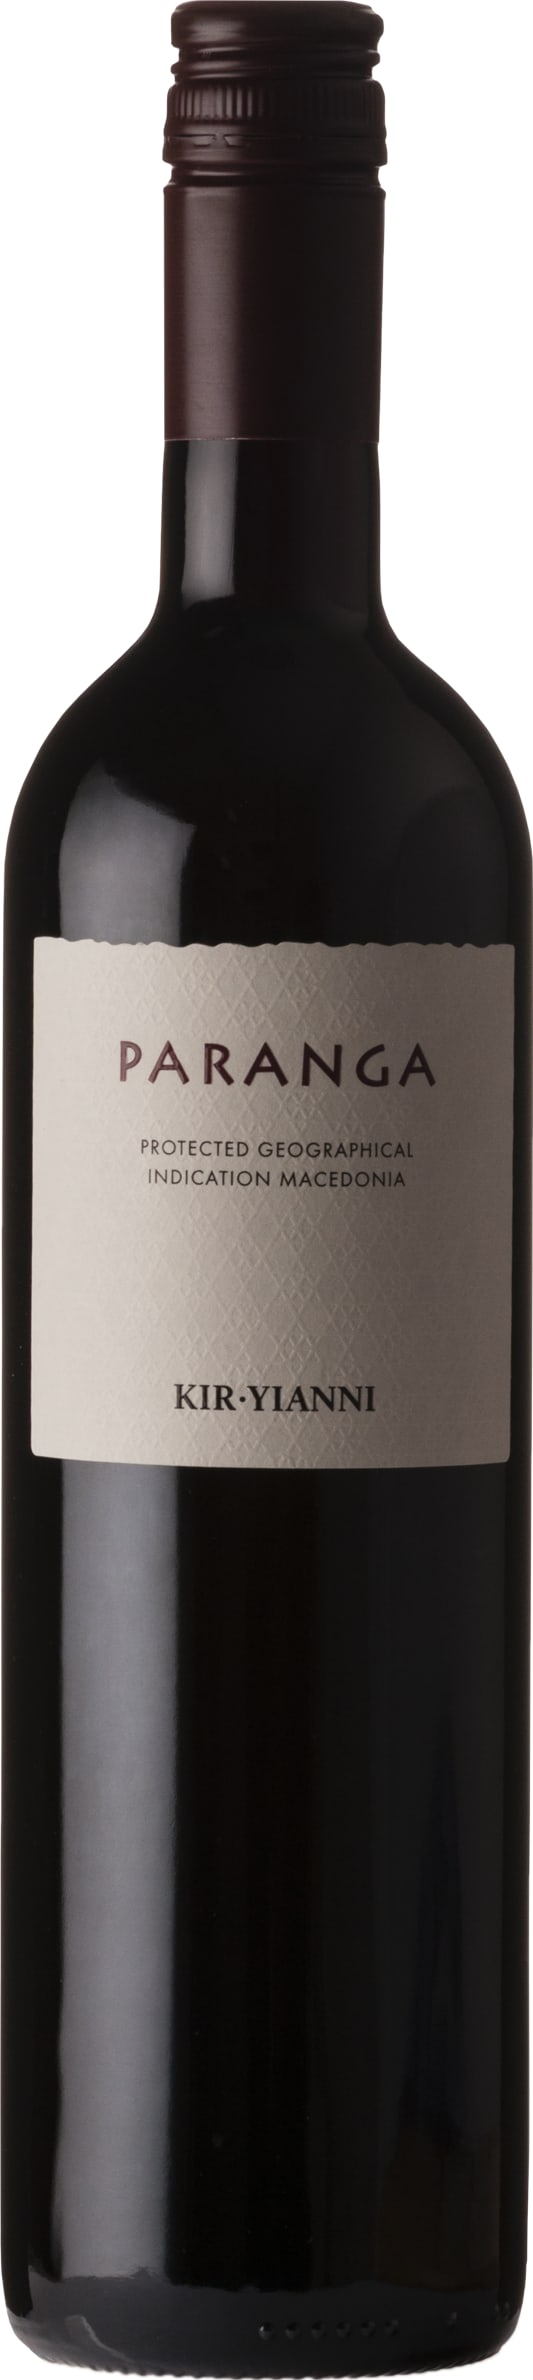 Kir-Yianni Paranga Red 2022 75cl - Buy Kir-Yianni Wines from GREAT WINES DIRECT wine shop